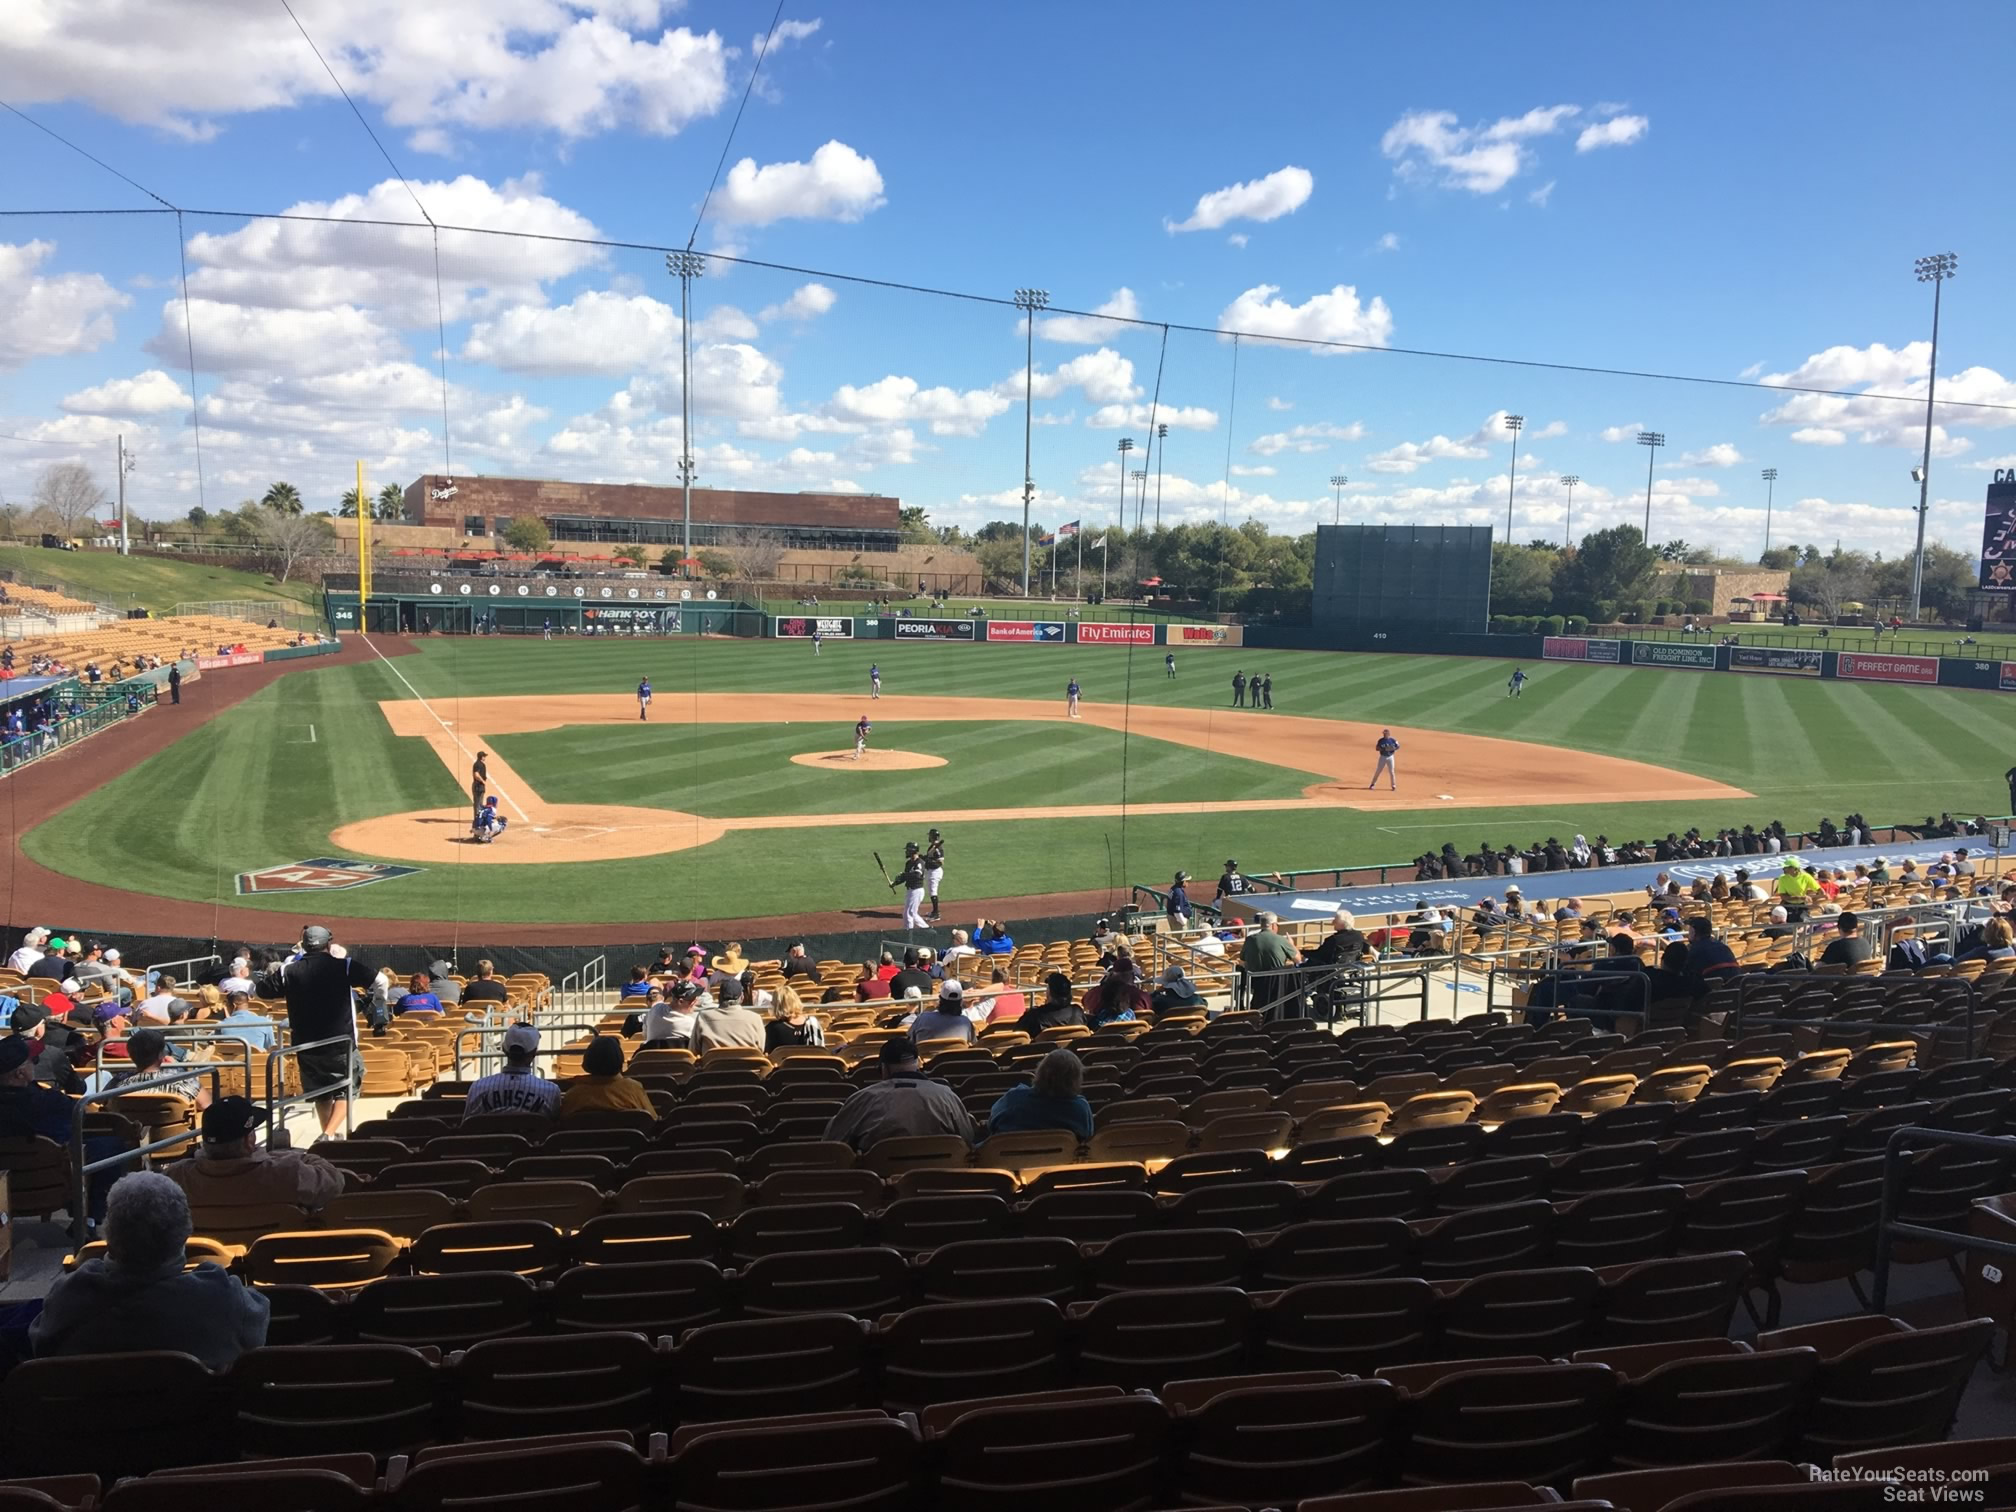 section 112, row 18 seat view  - camelback ranch